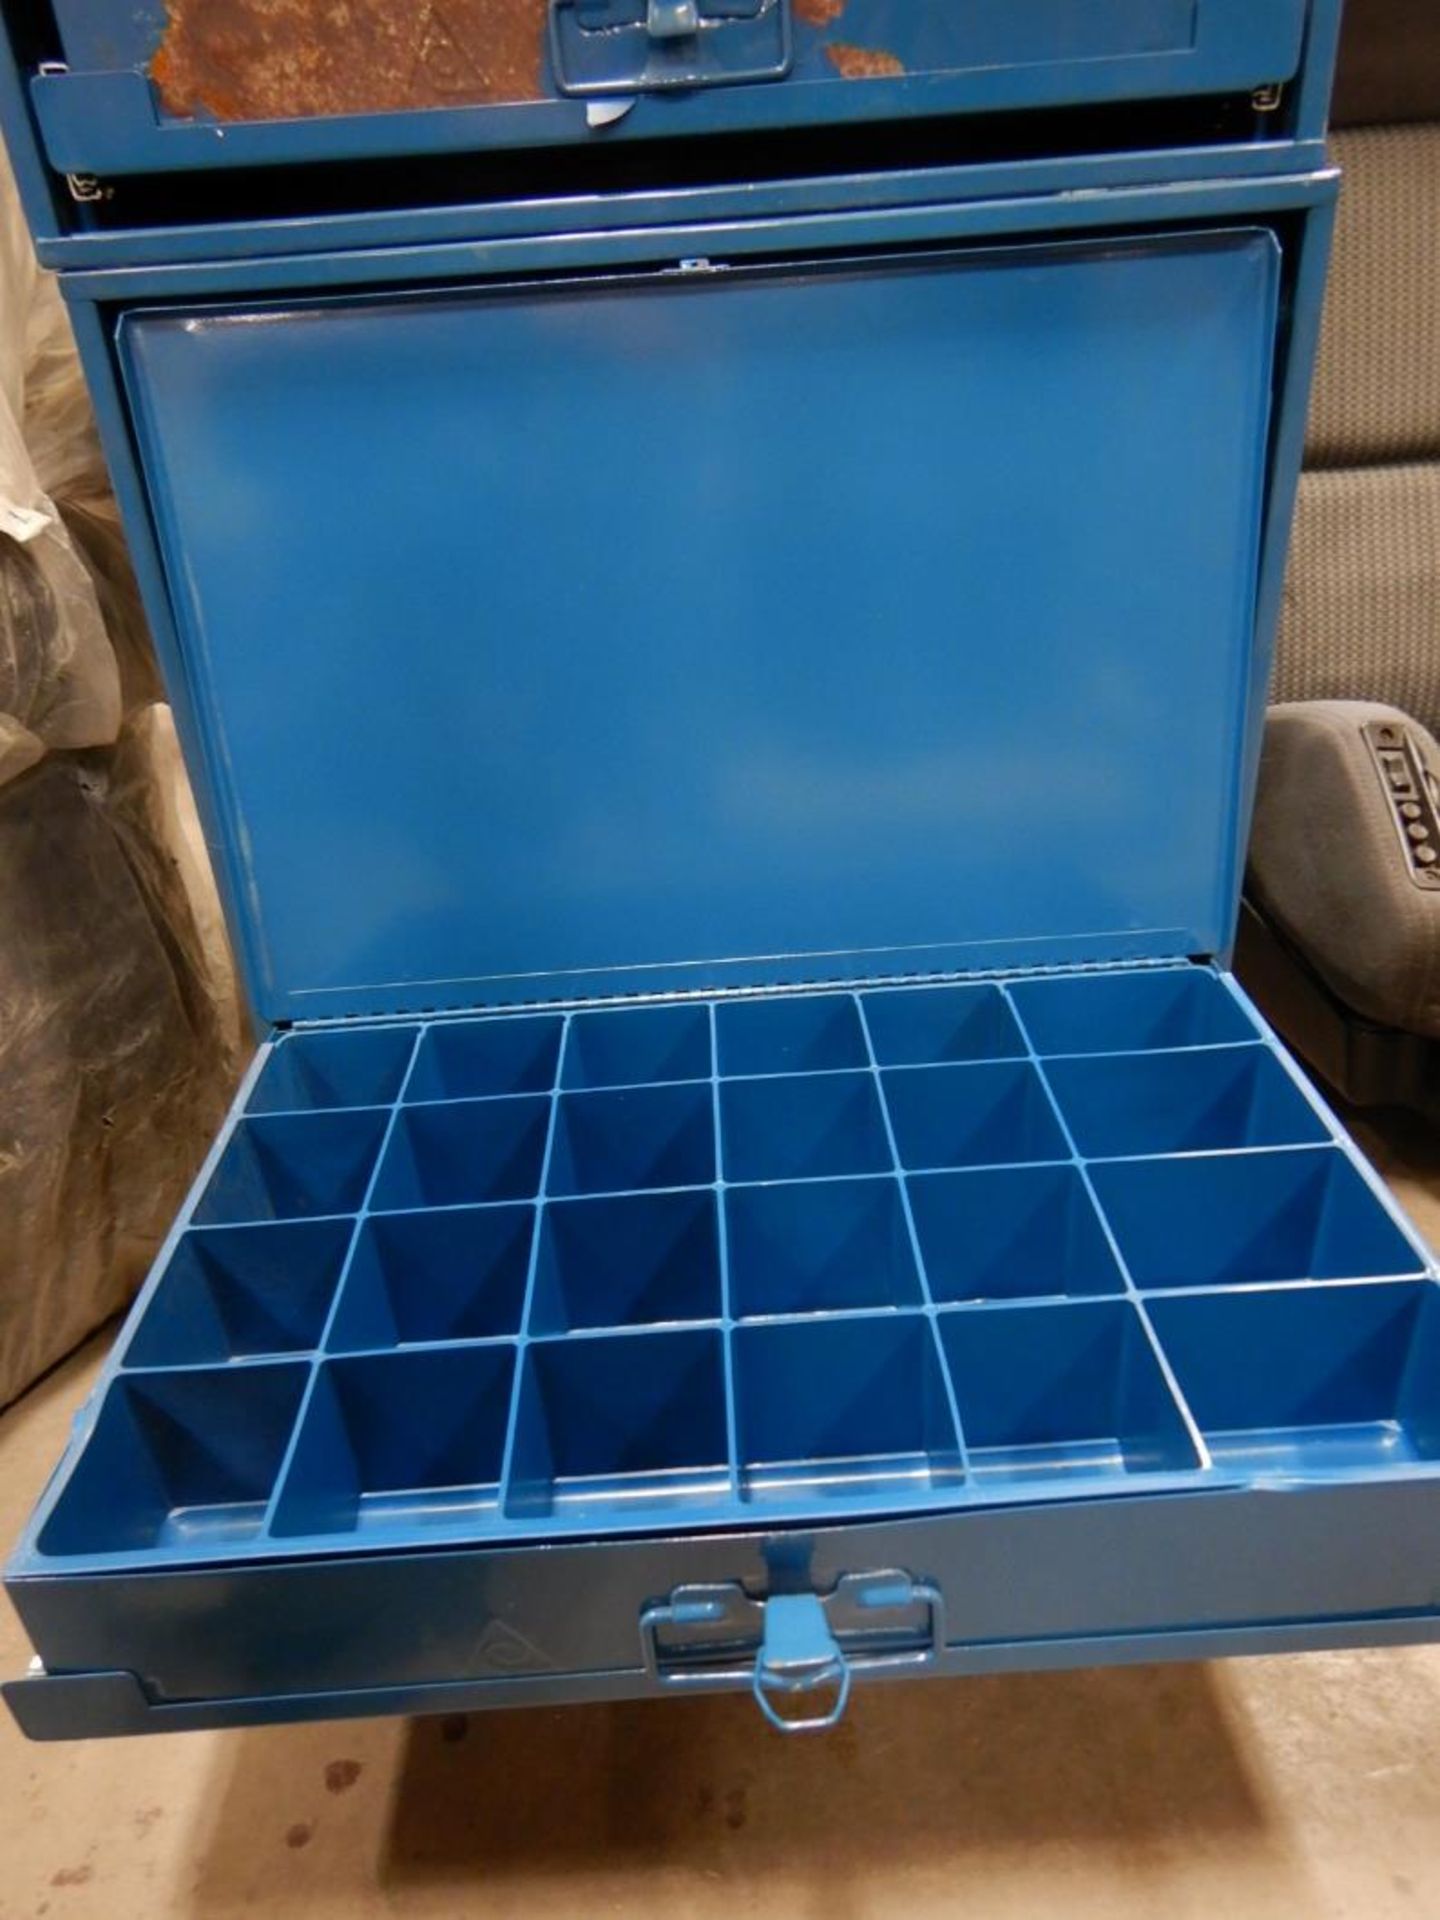 5-METAL HARDWARE STORAGE TRAYS AND TRAY RACK - Image 2 of 2